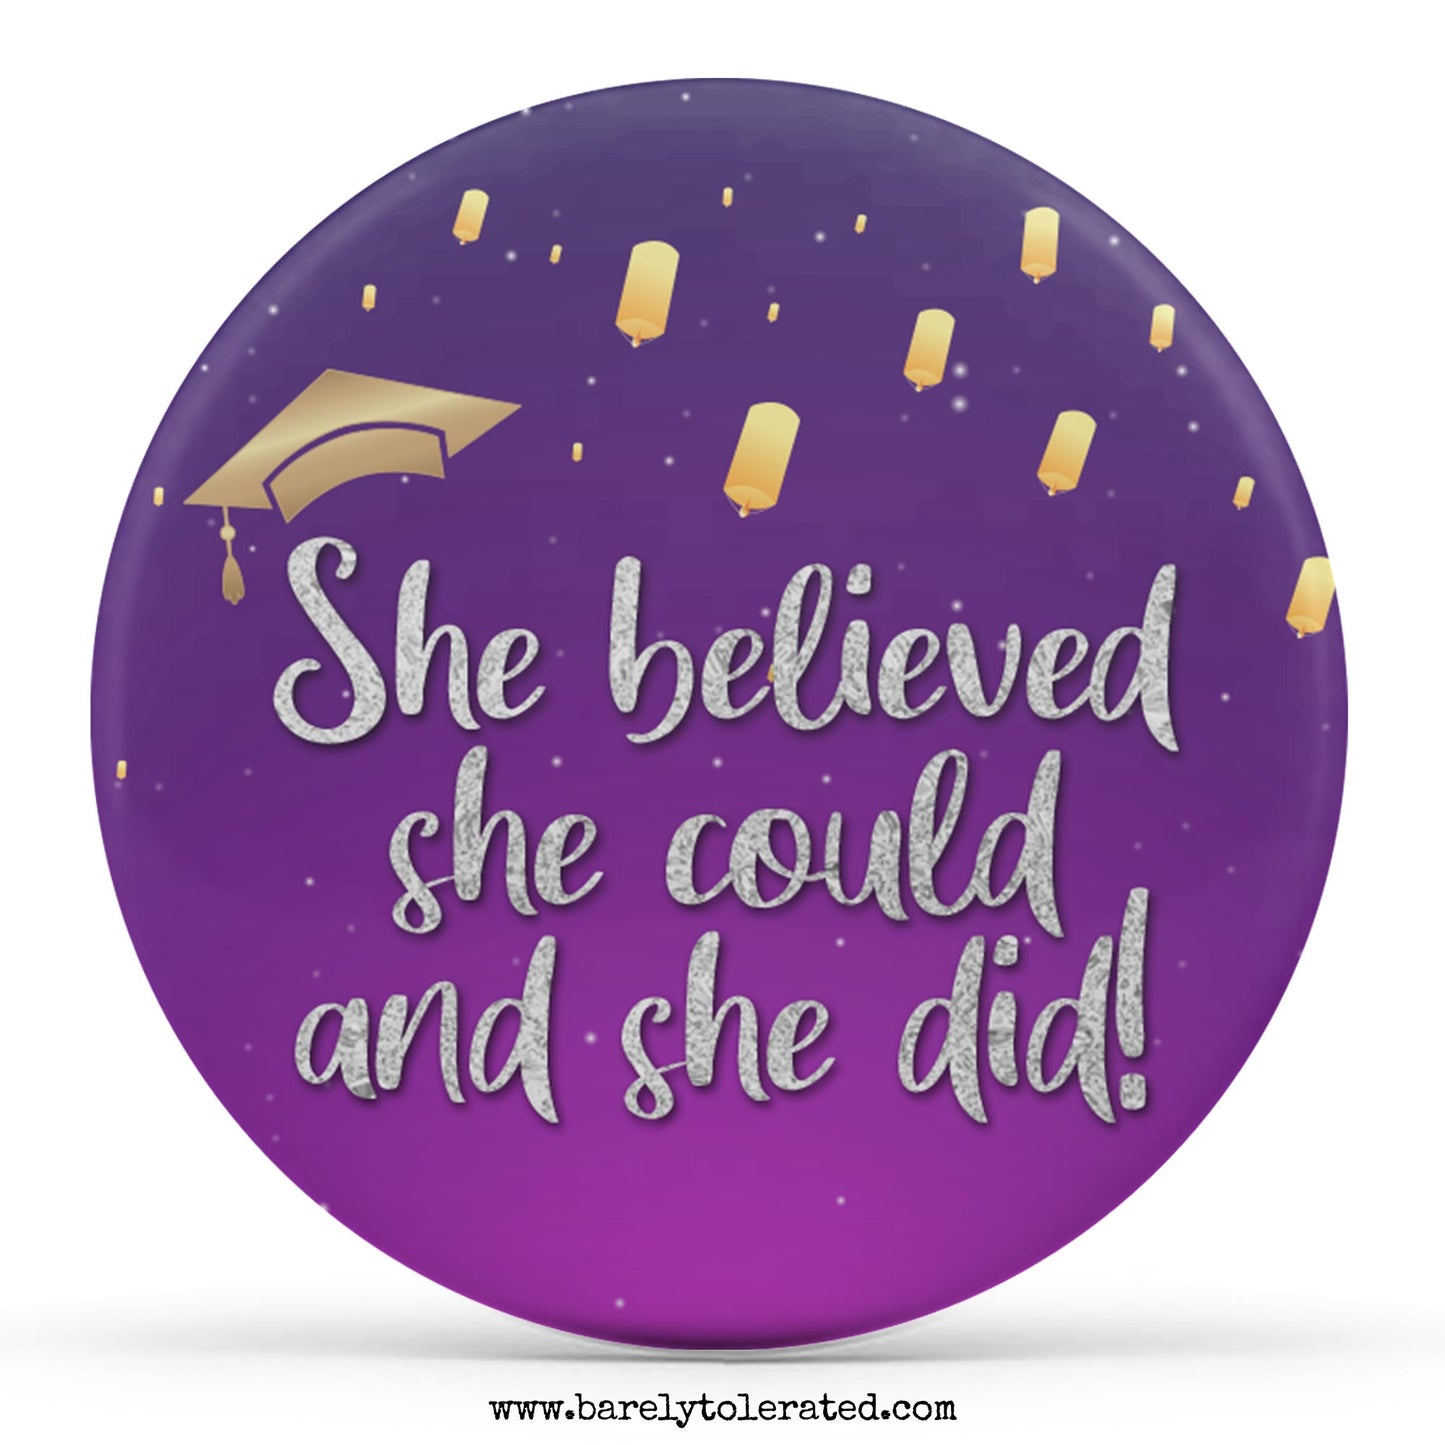 She Believed She Could And She Did!